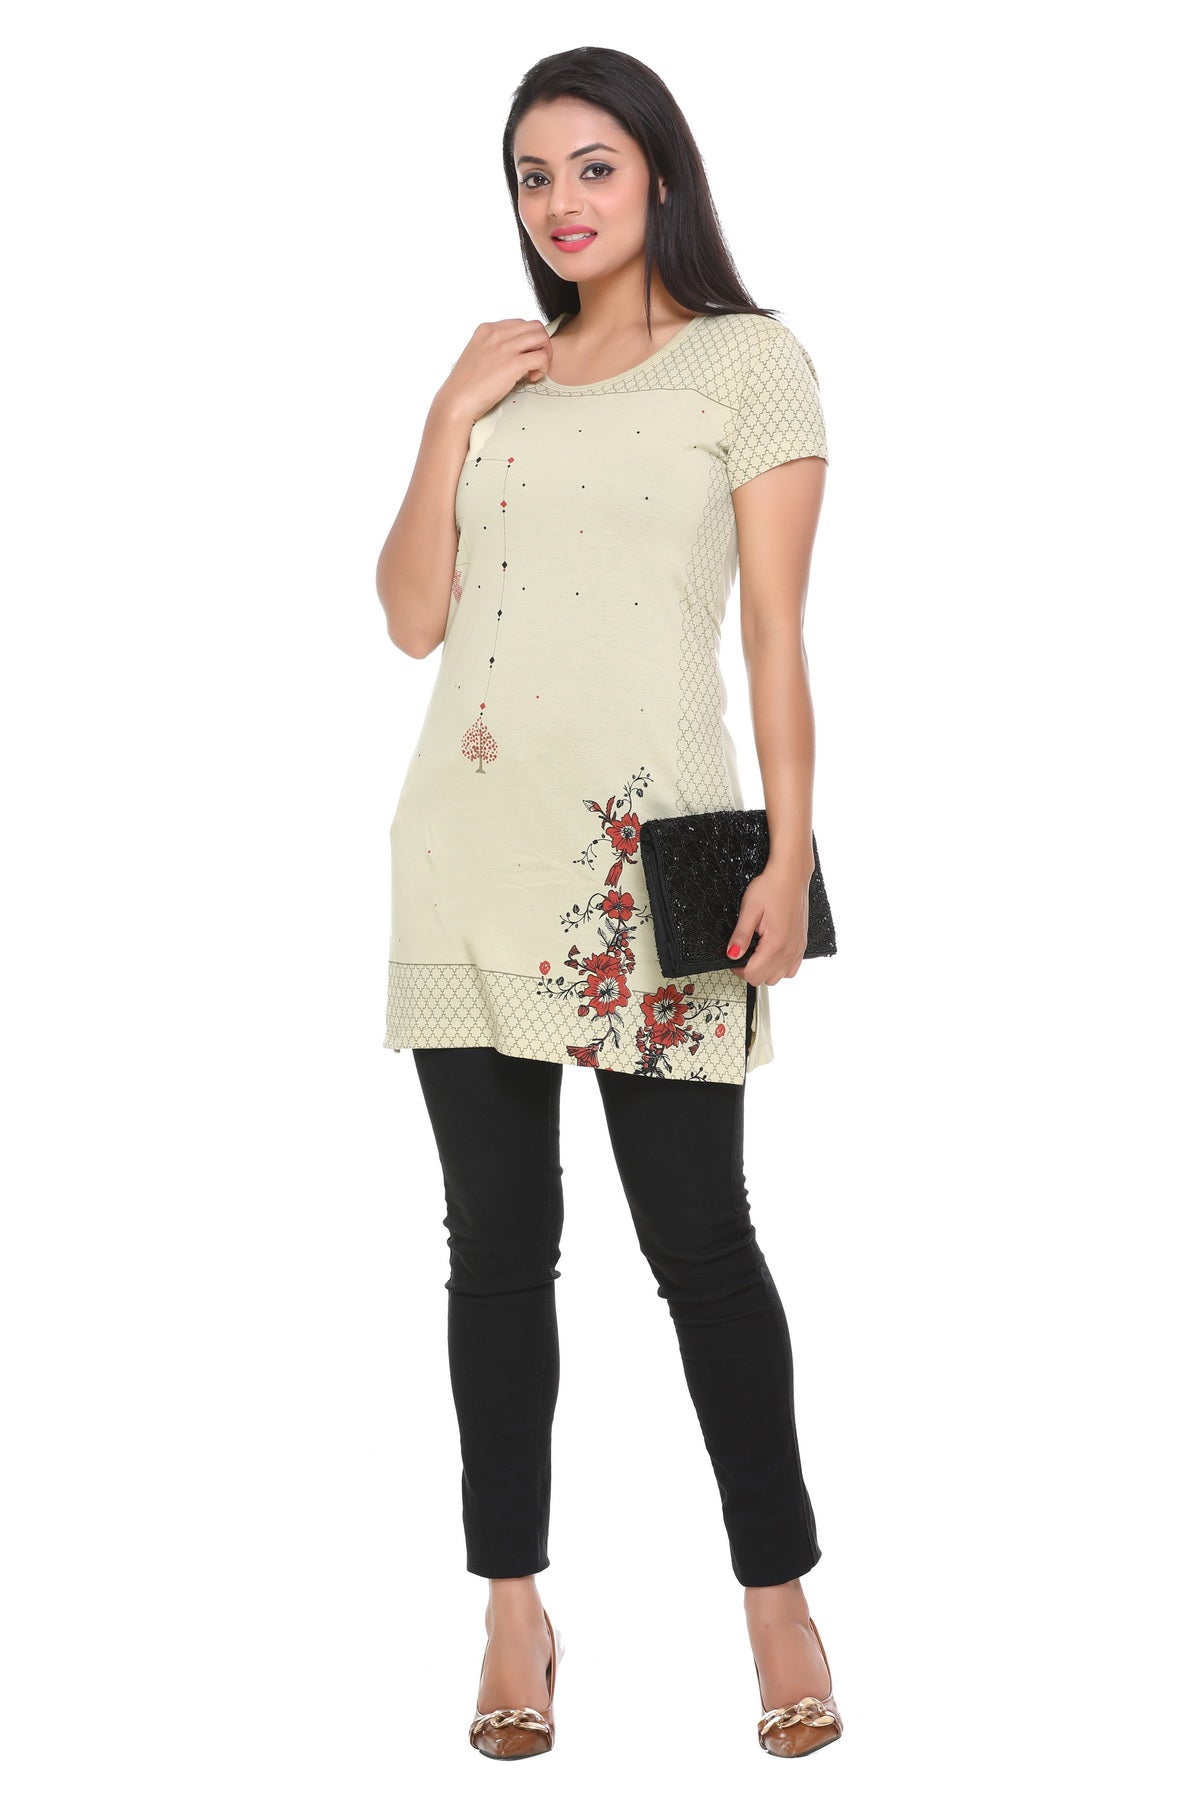 Cotton Printed Long T-shirts For Women Half Sleeve - Beige at Best Prices